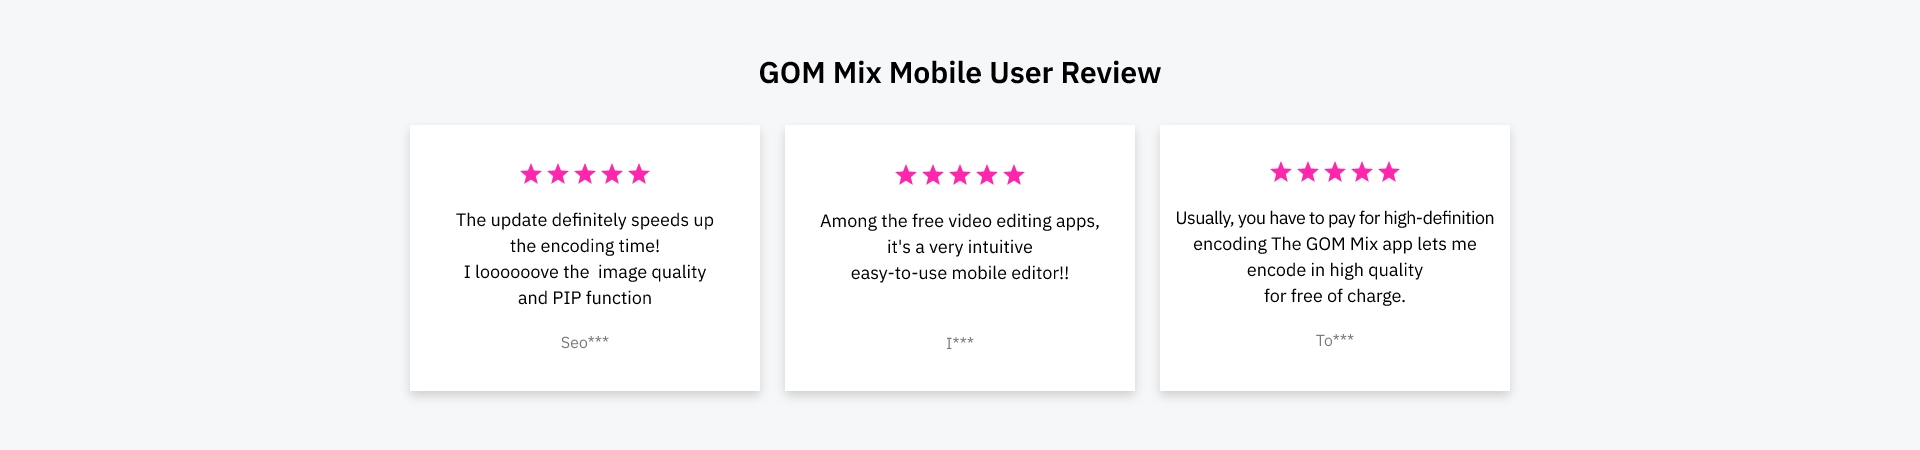 GOM Mix Mobile User Review Image